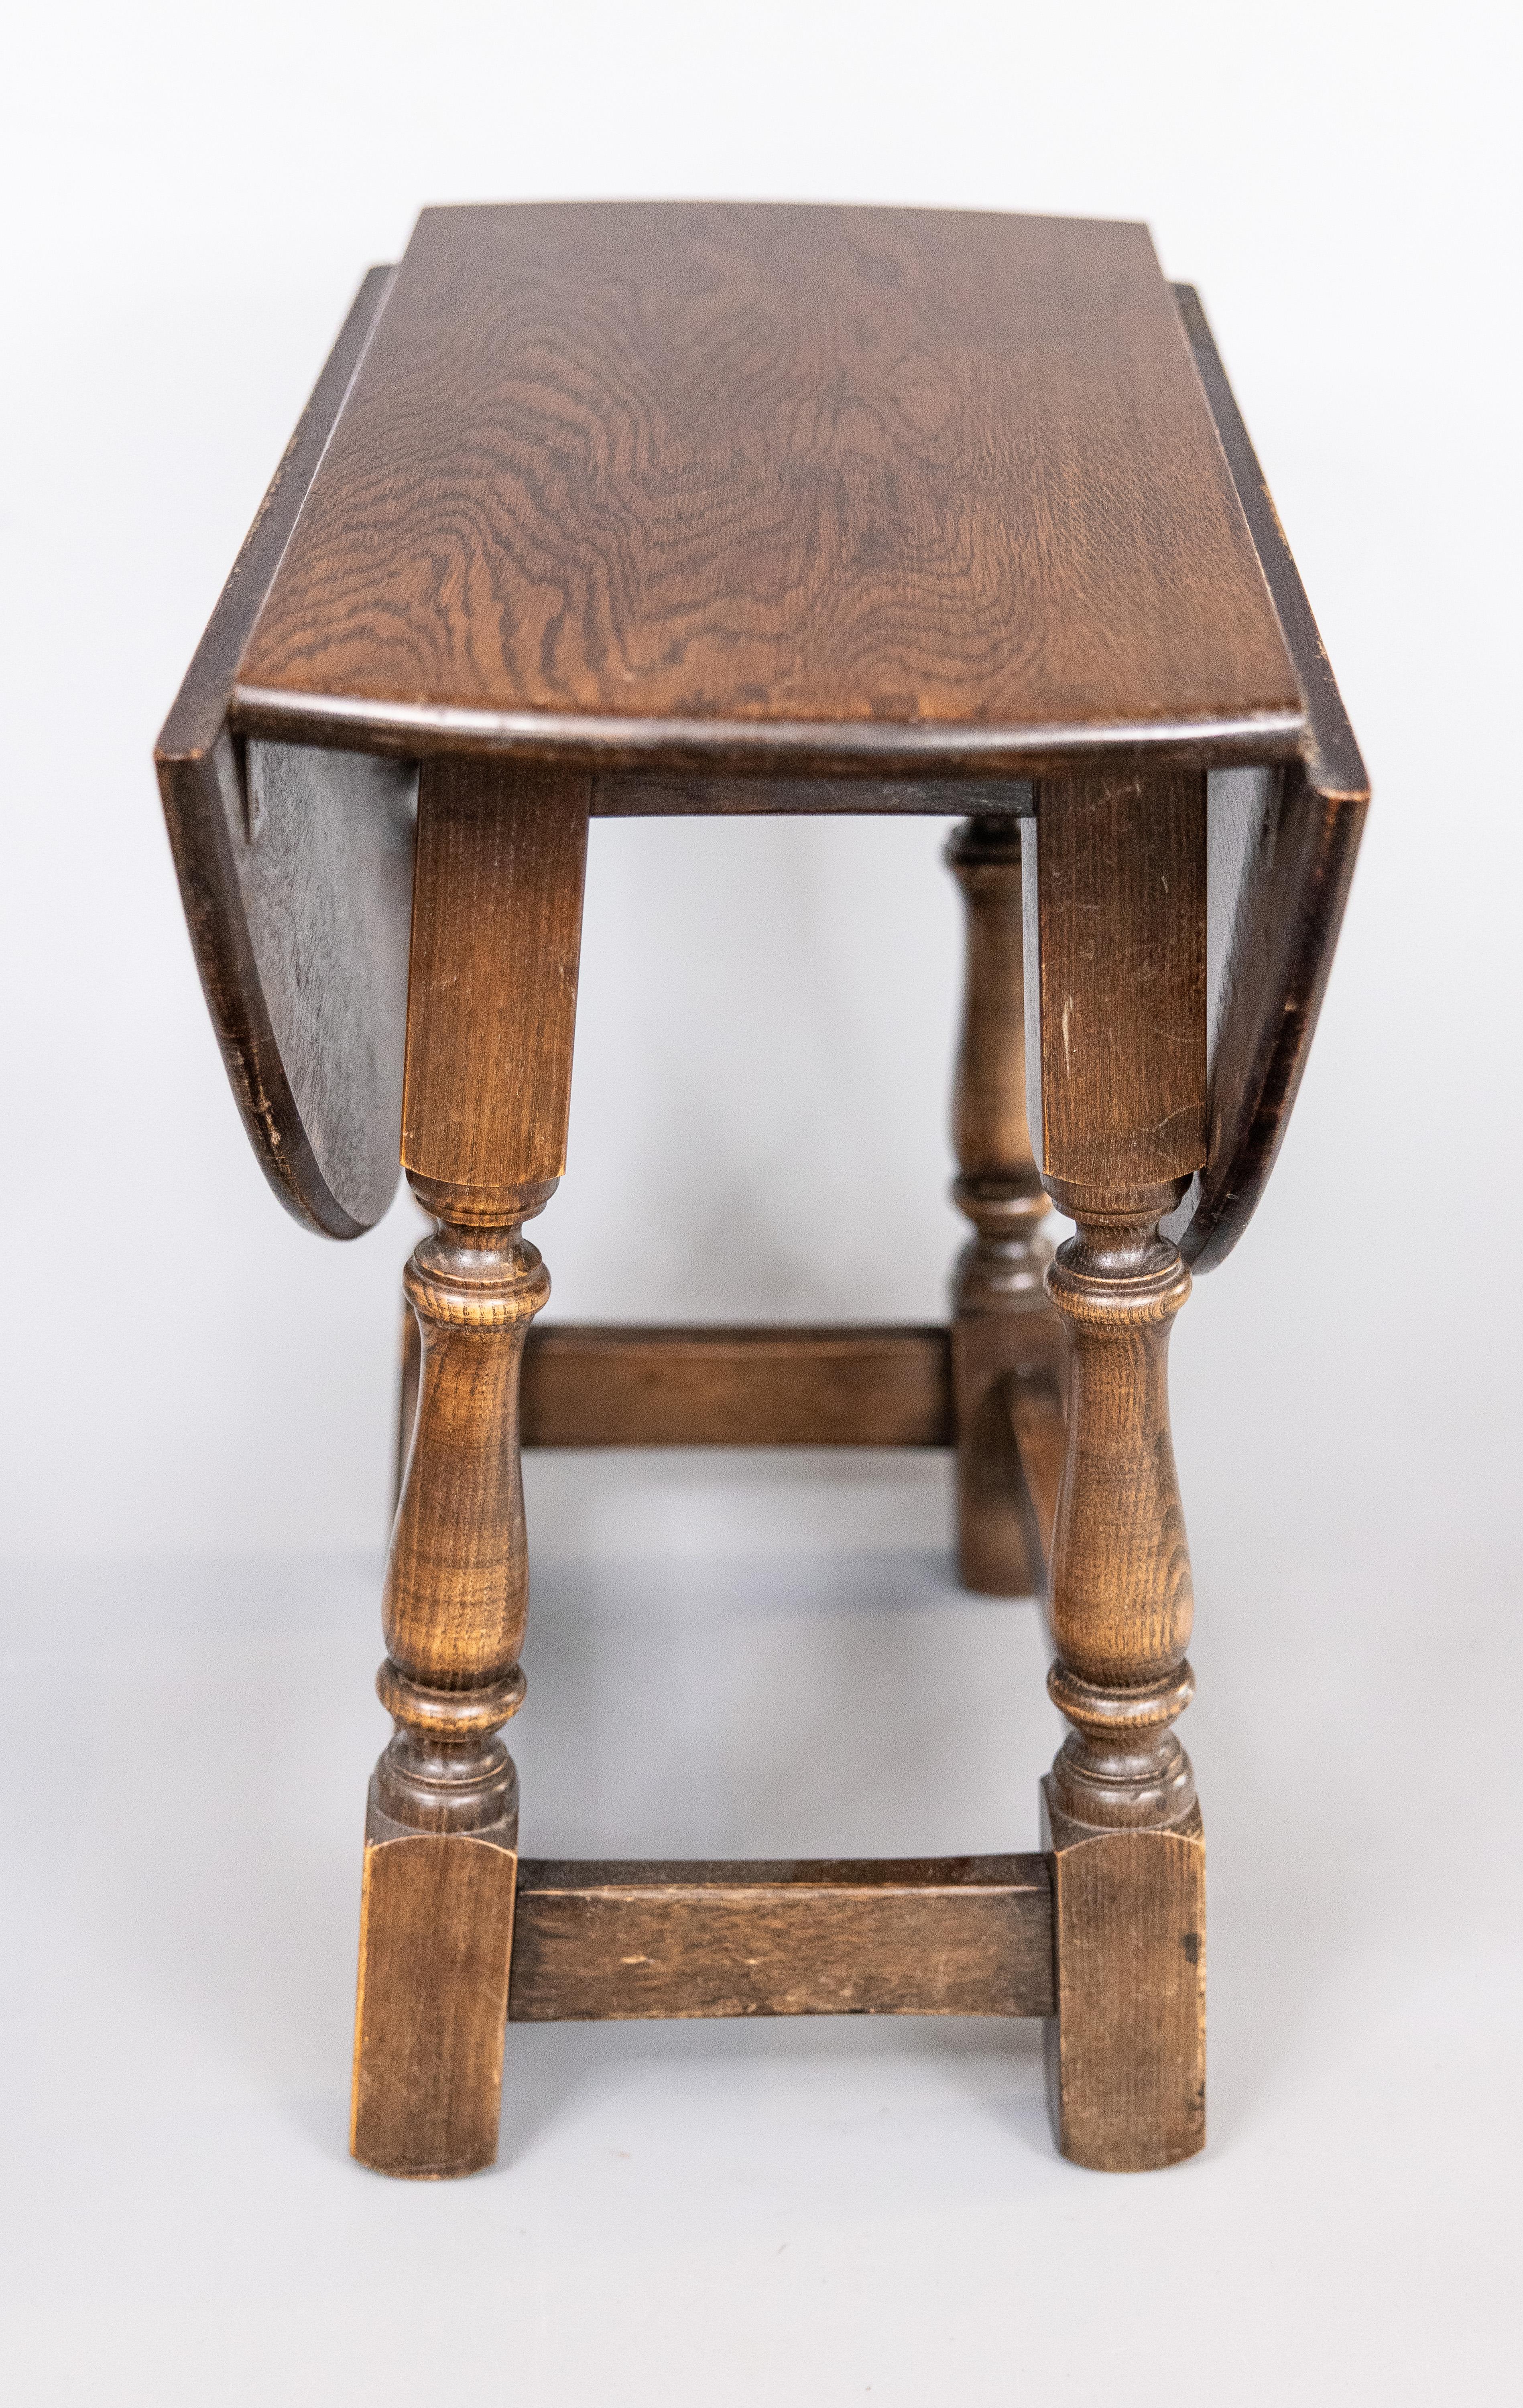 Antique English Drop Leaf Joint Stool / Side Table In Good Condition For Sale In Pearland, TX